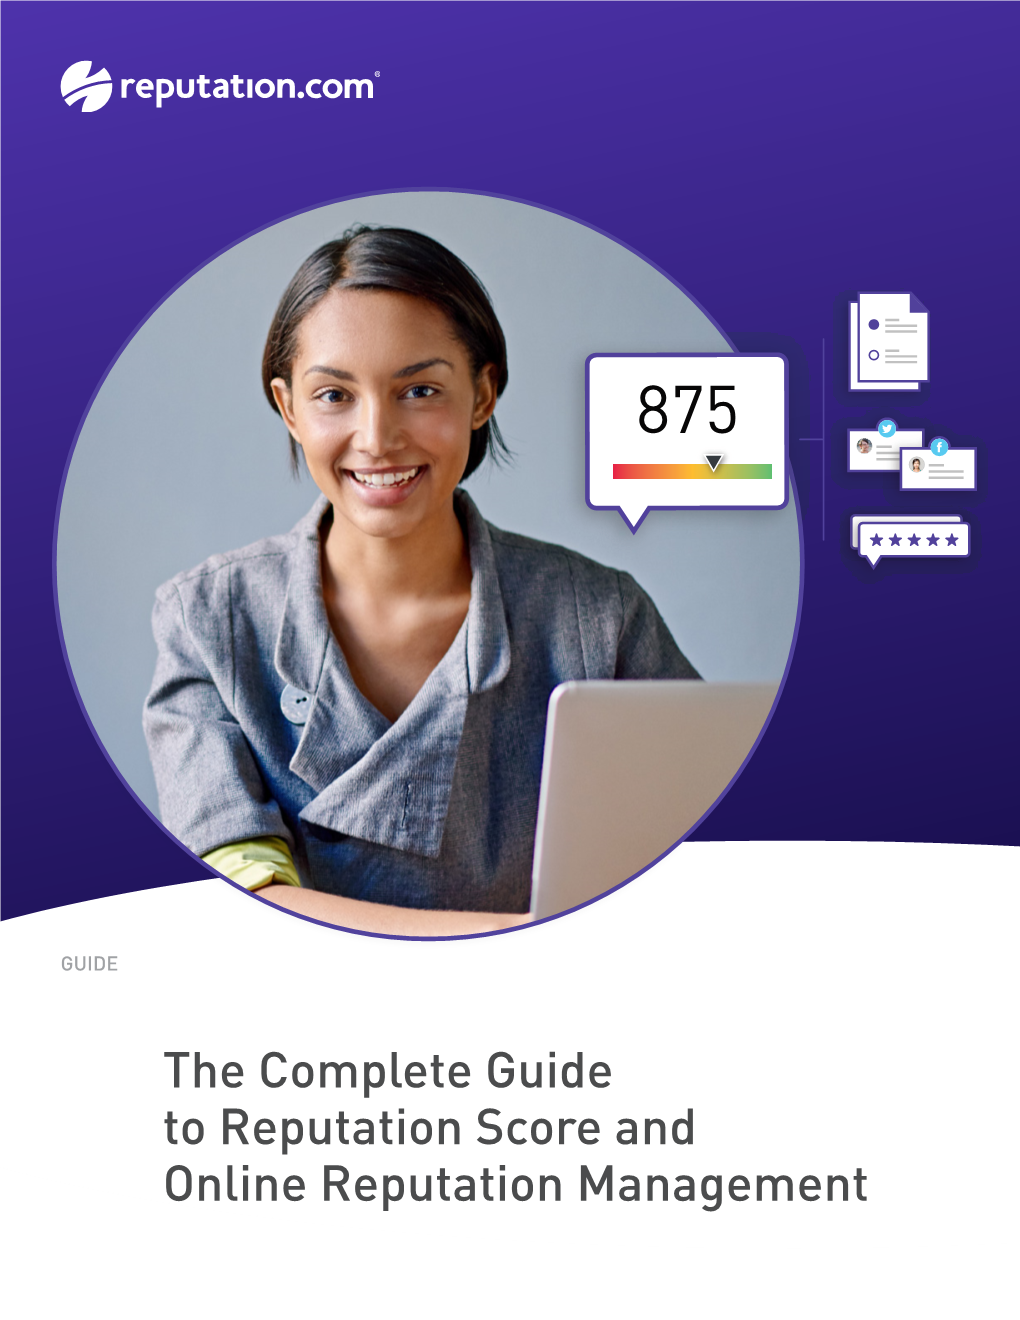 The Complete Guide to Reputation Score and Online Reputation Management the Complete Guide to Online Reputation Management (ORM)